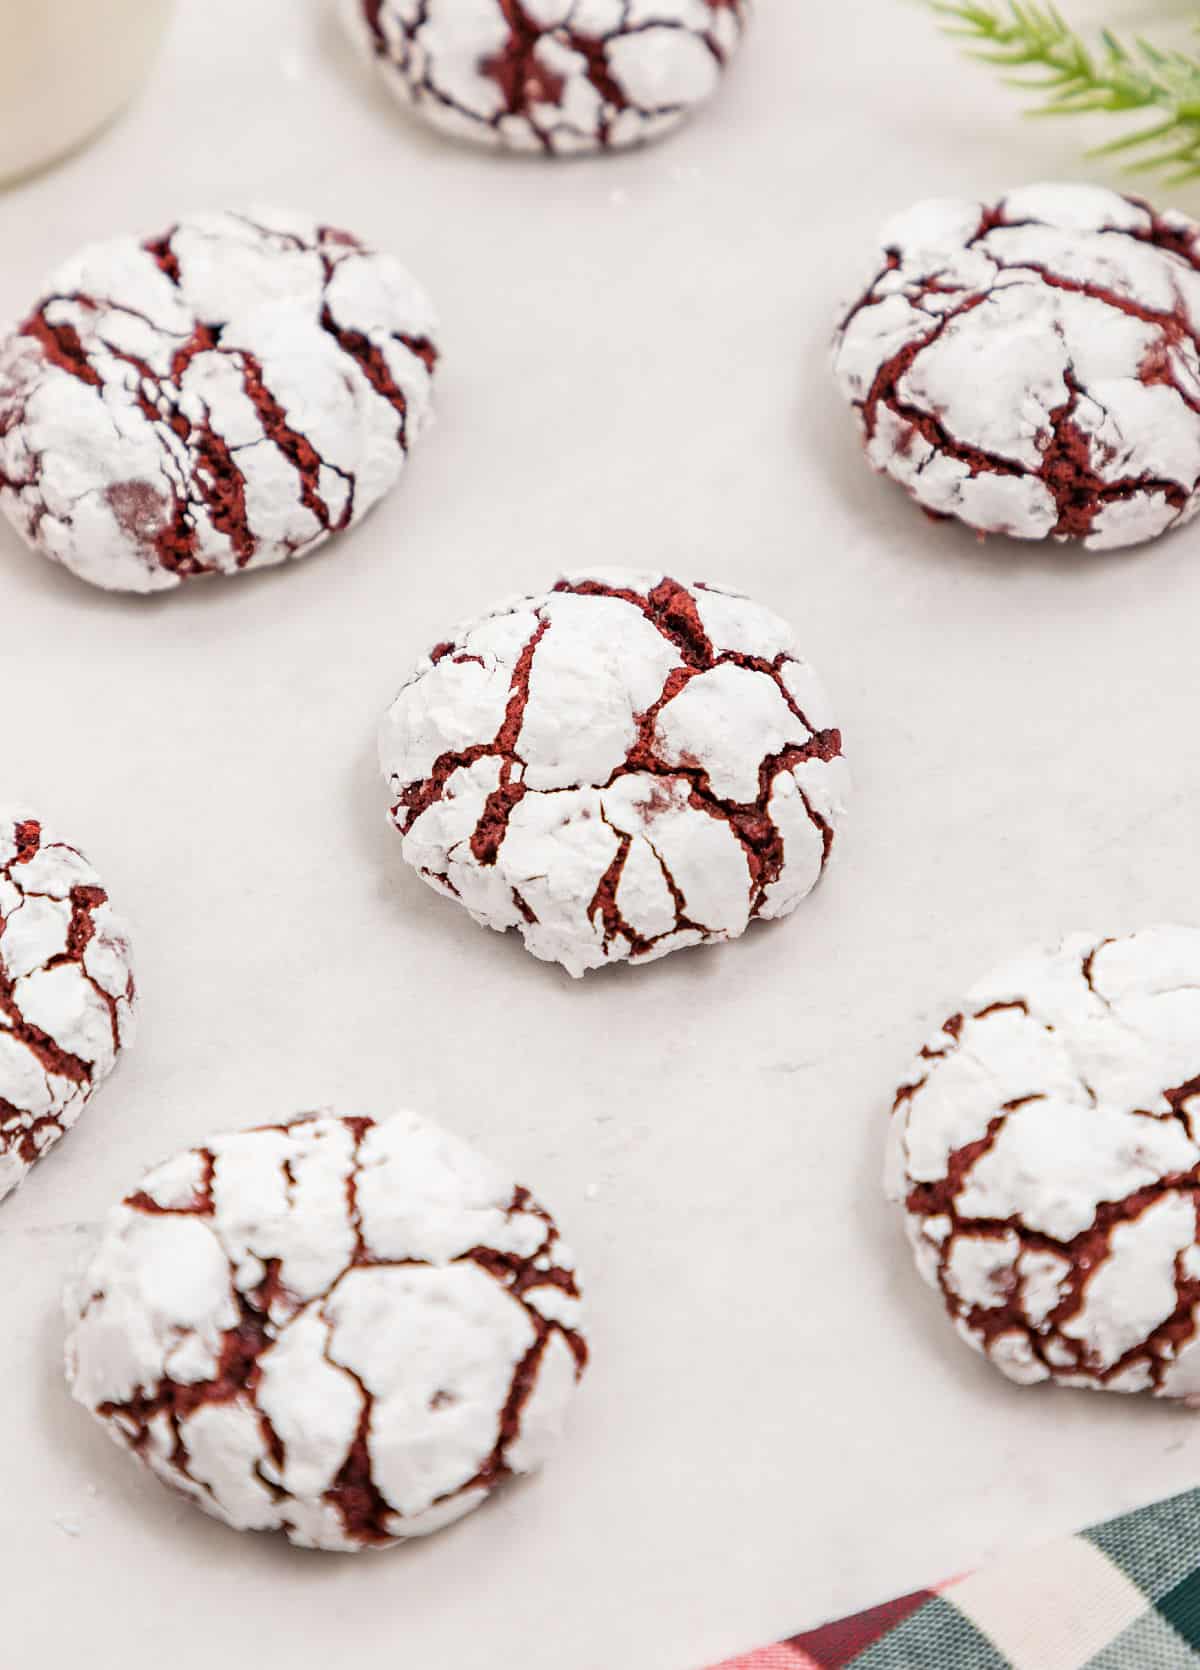 Red velvet cookies rolled on powdered sugar and baked.